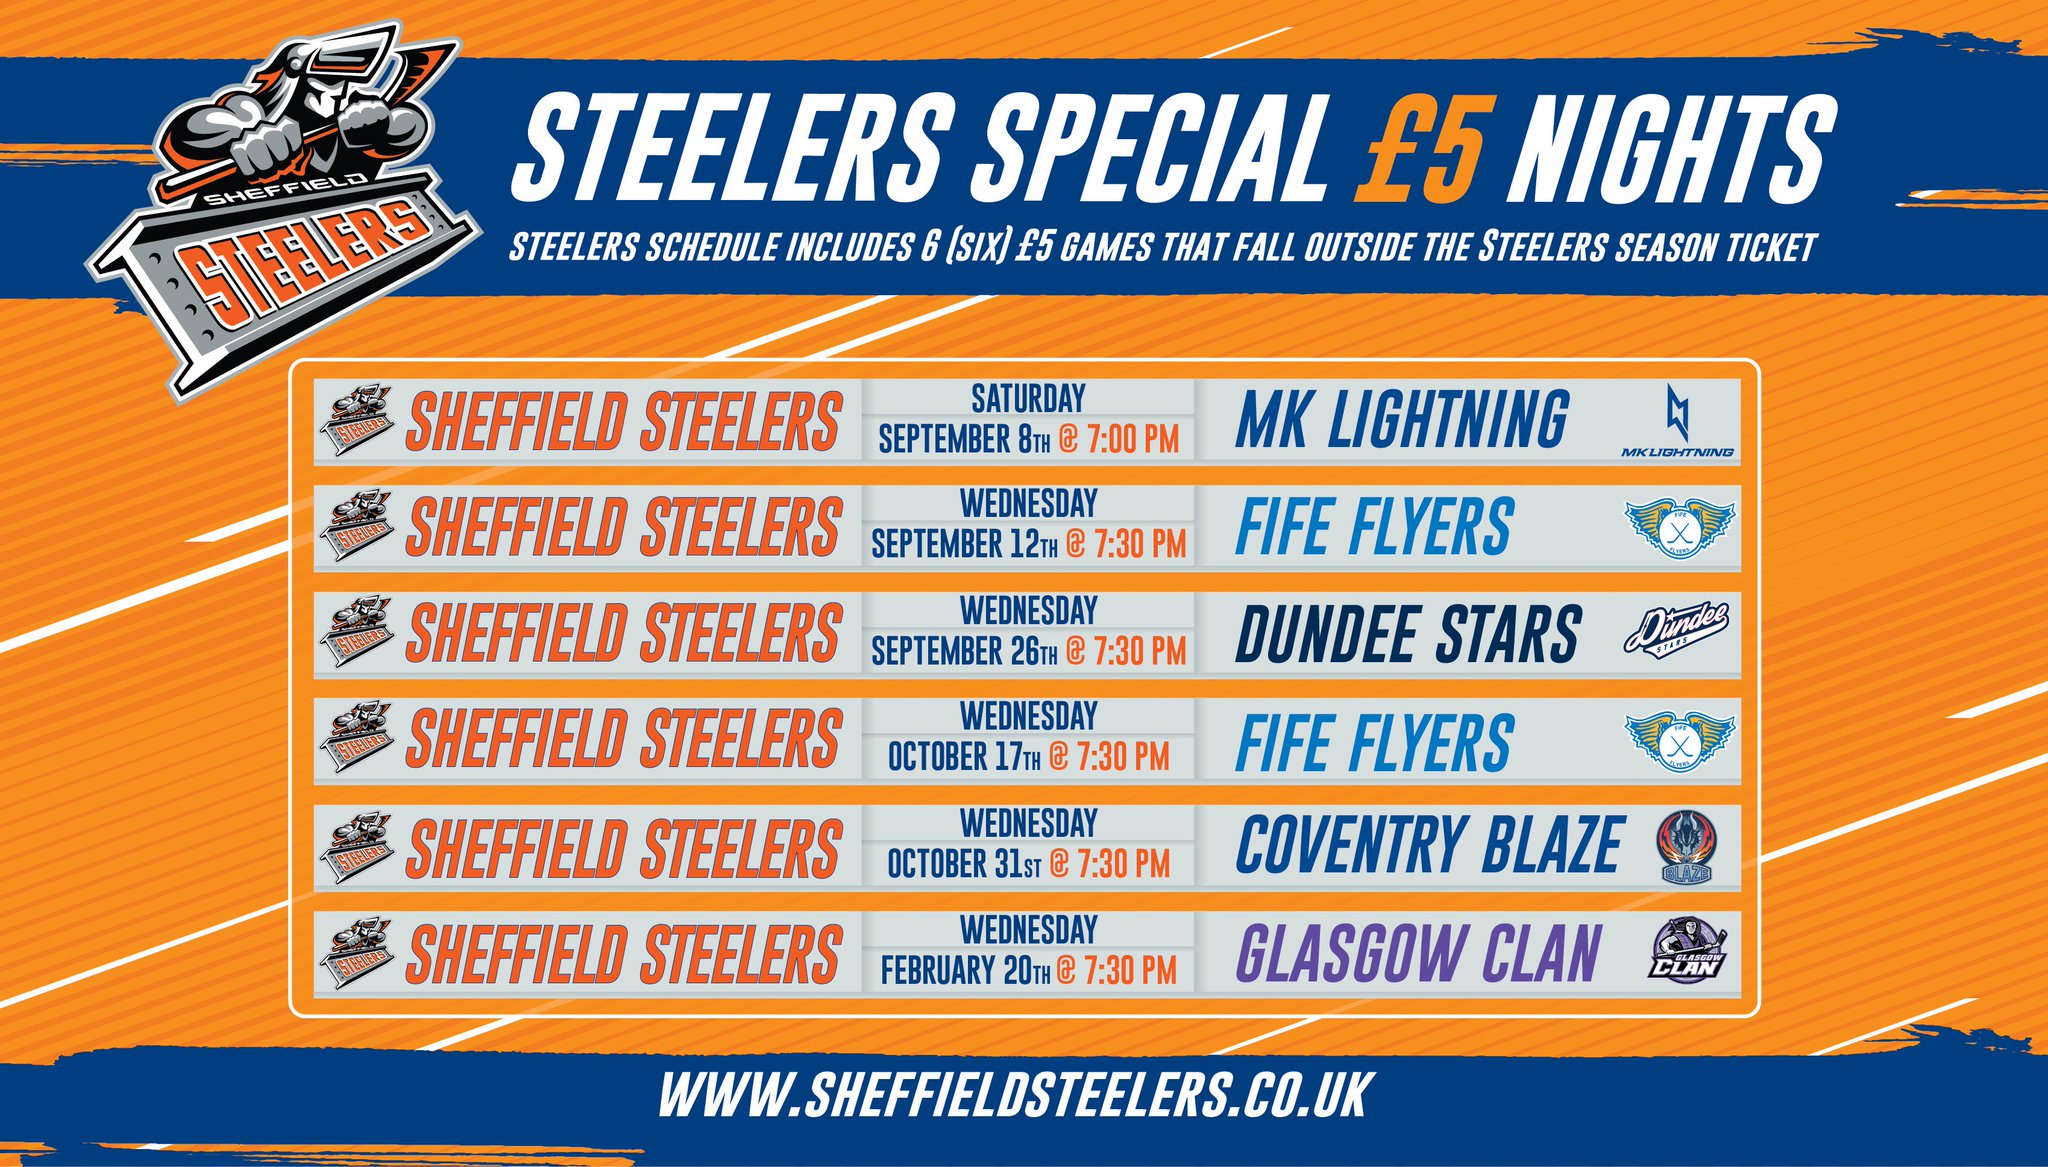 STEELERS OFFICIAL on Twitter "All tickets for these 6 games are priced